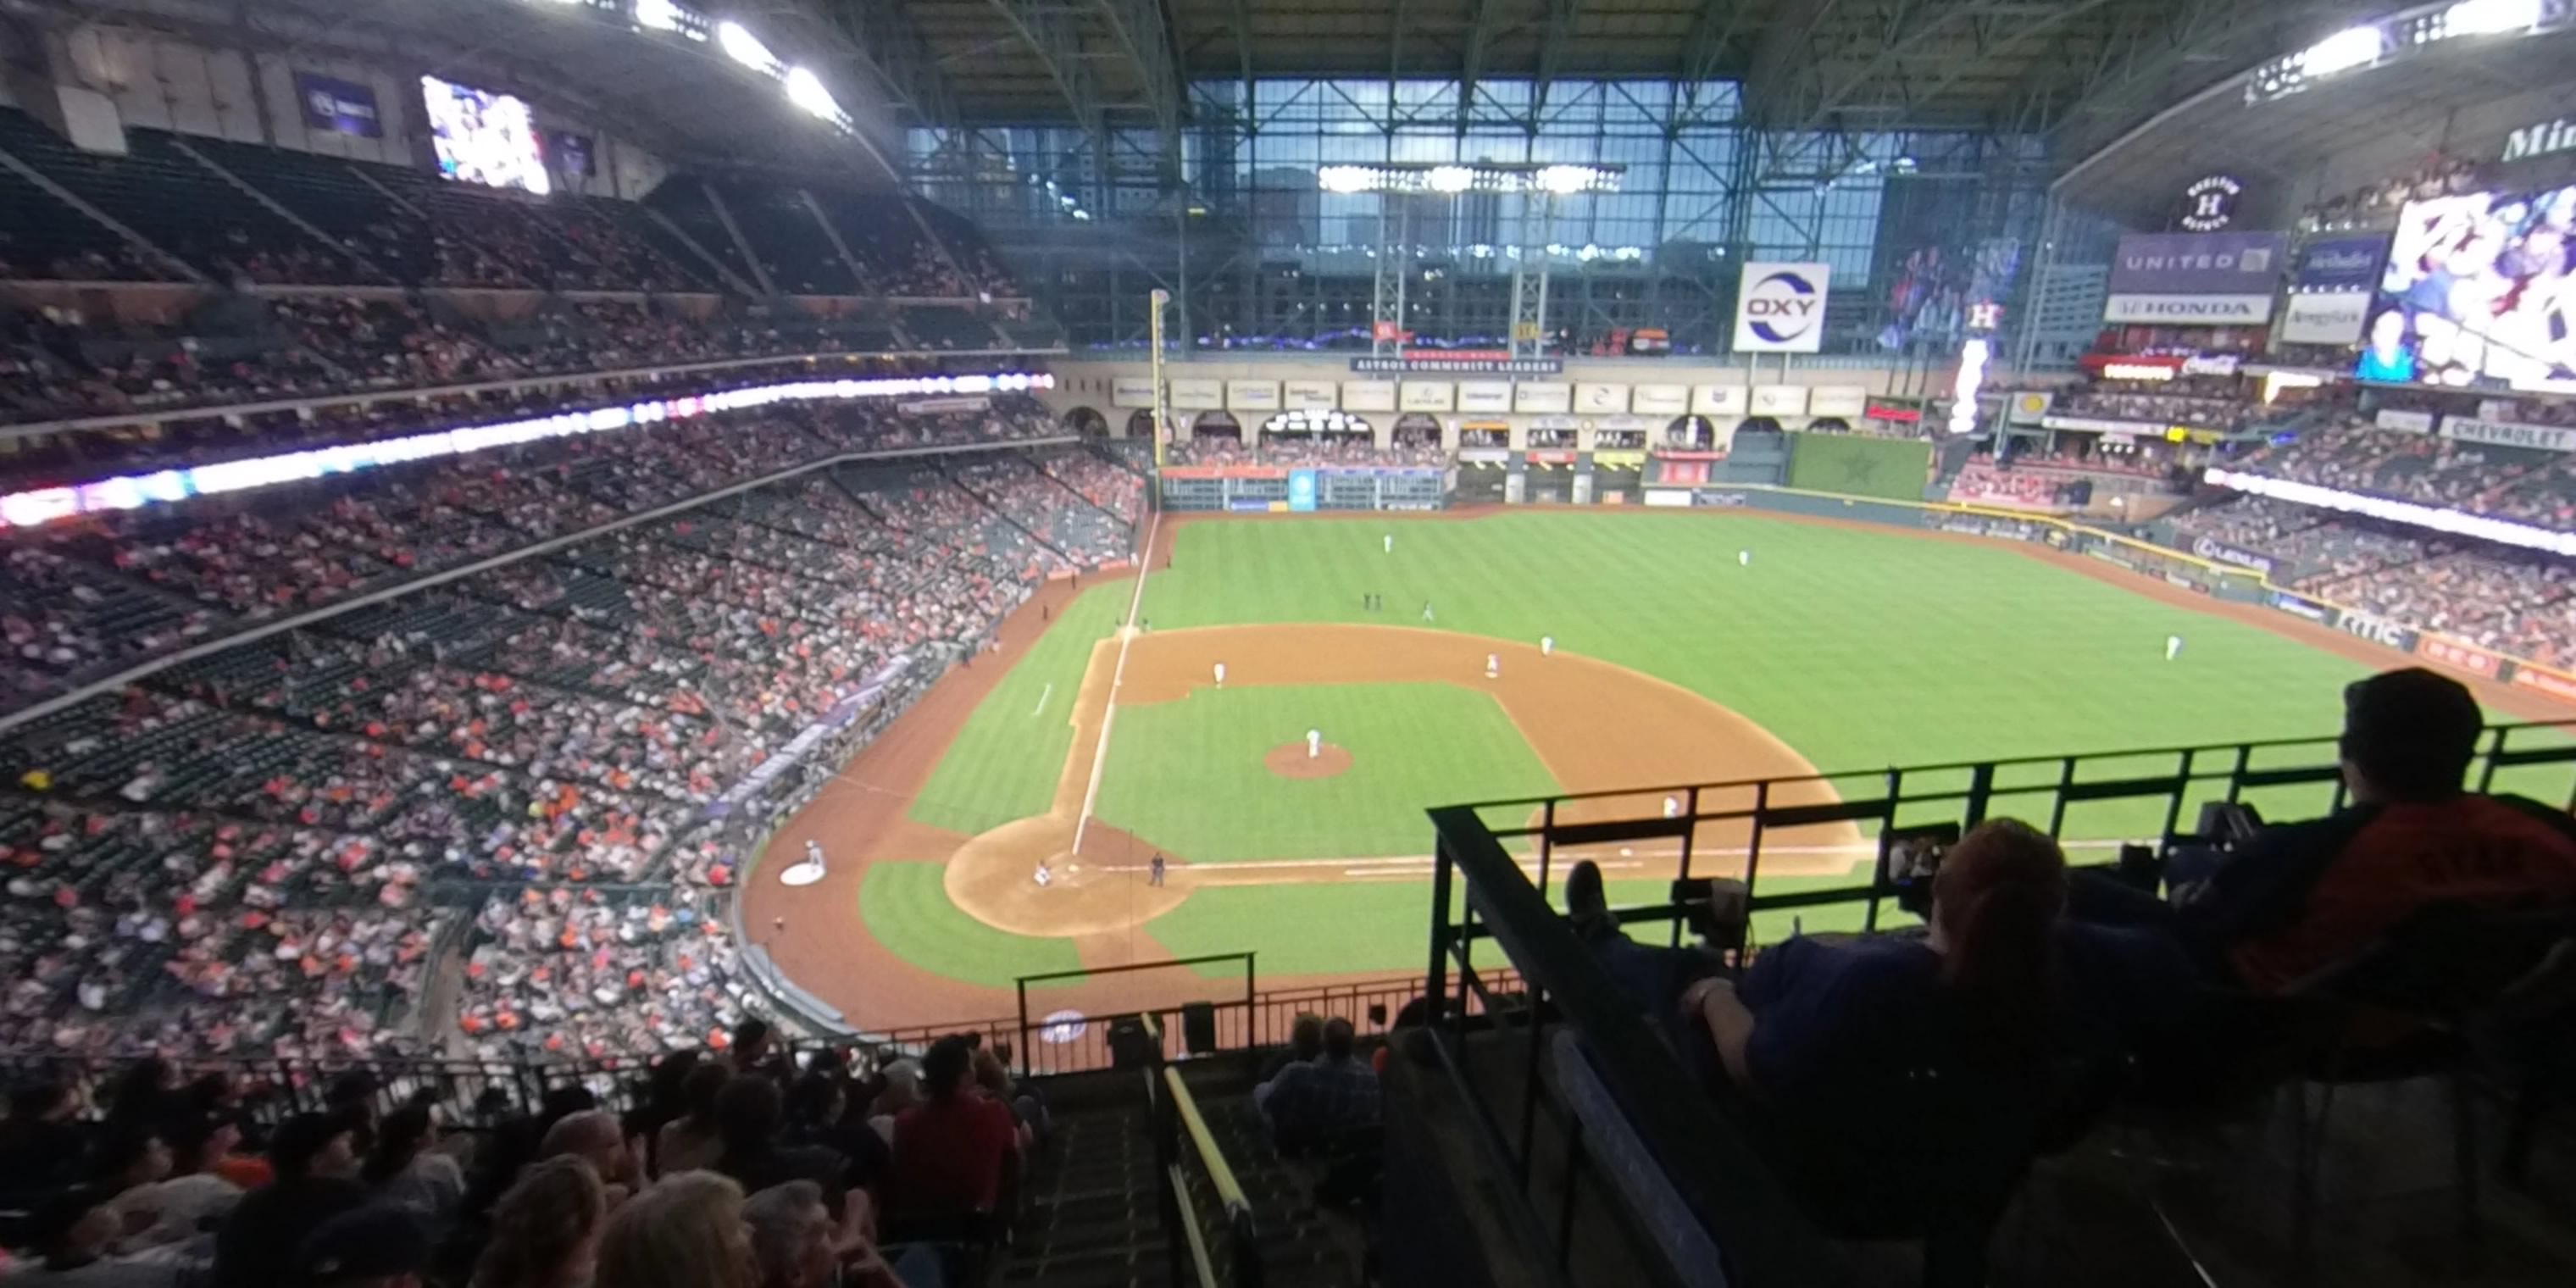 section 323 panoramic seat view  for baseball - minute maid park